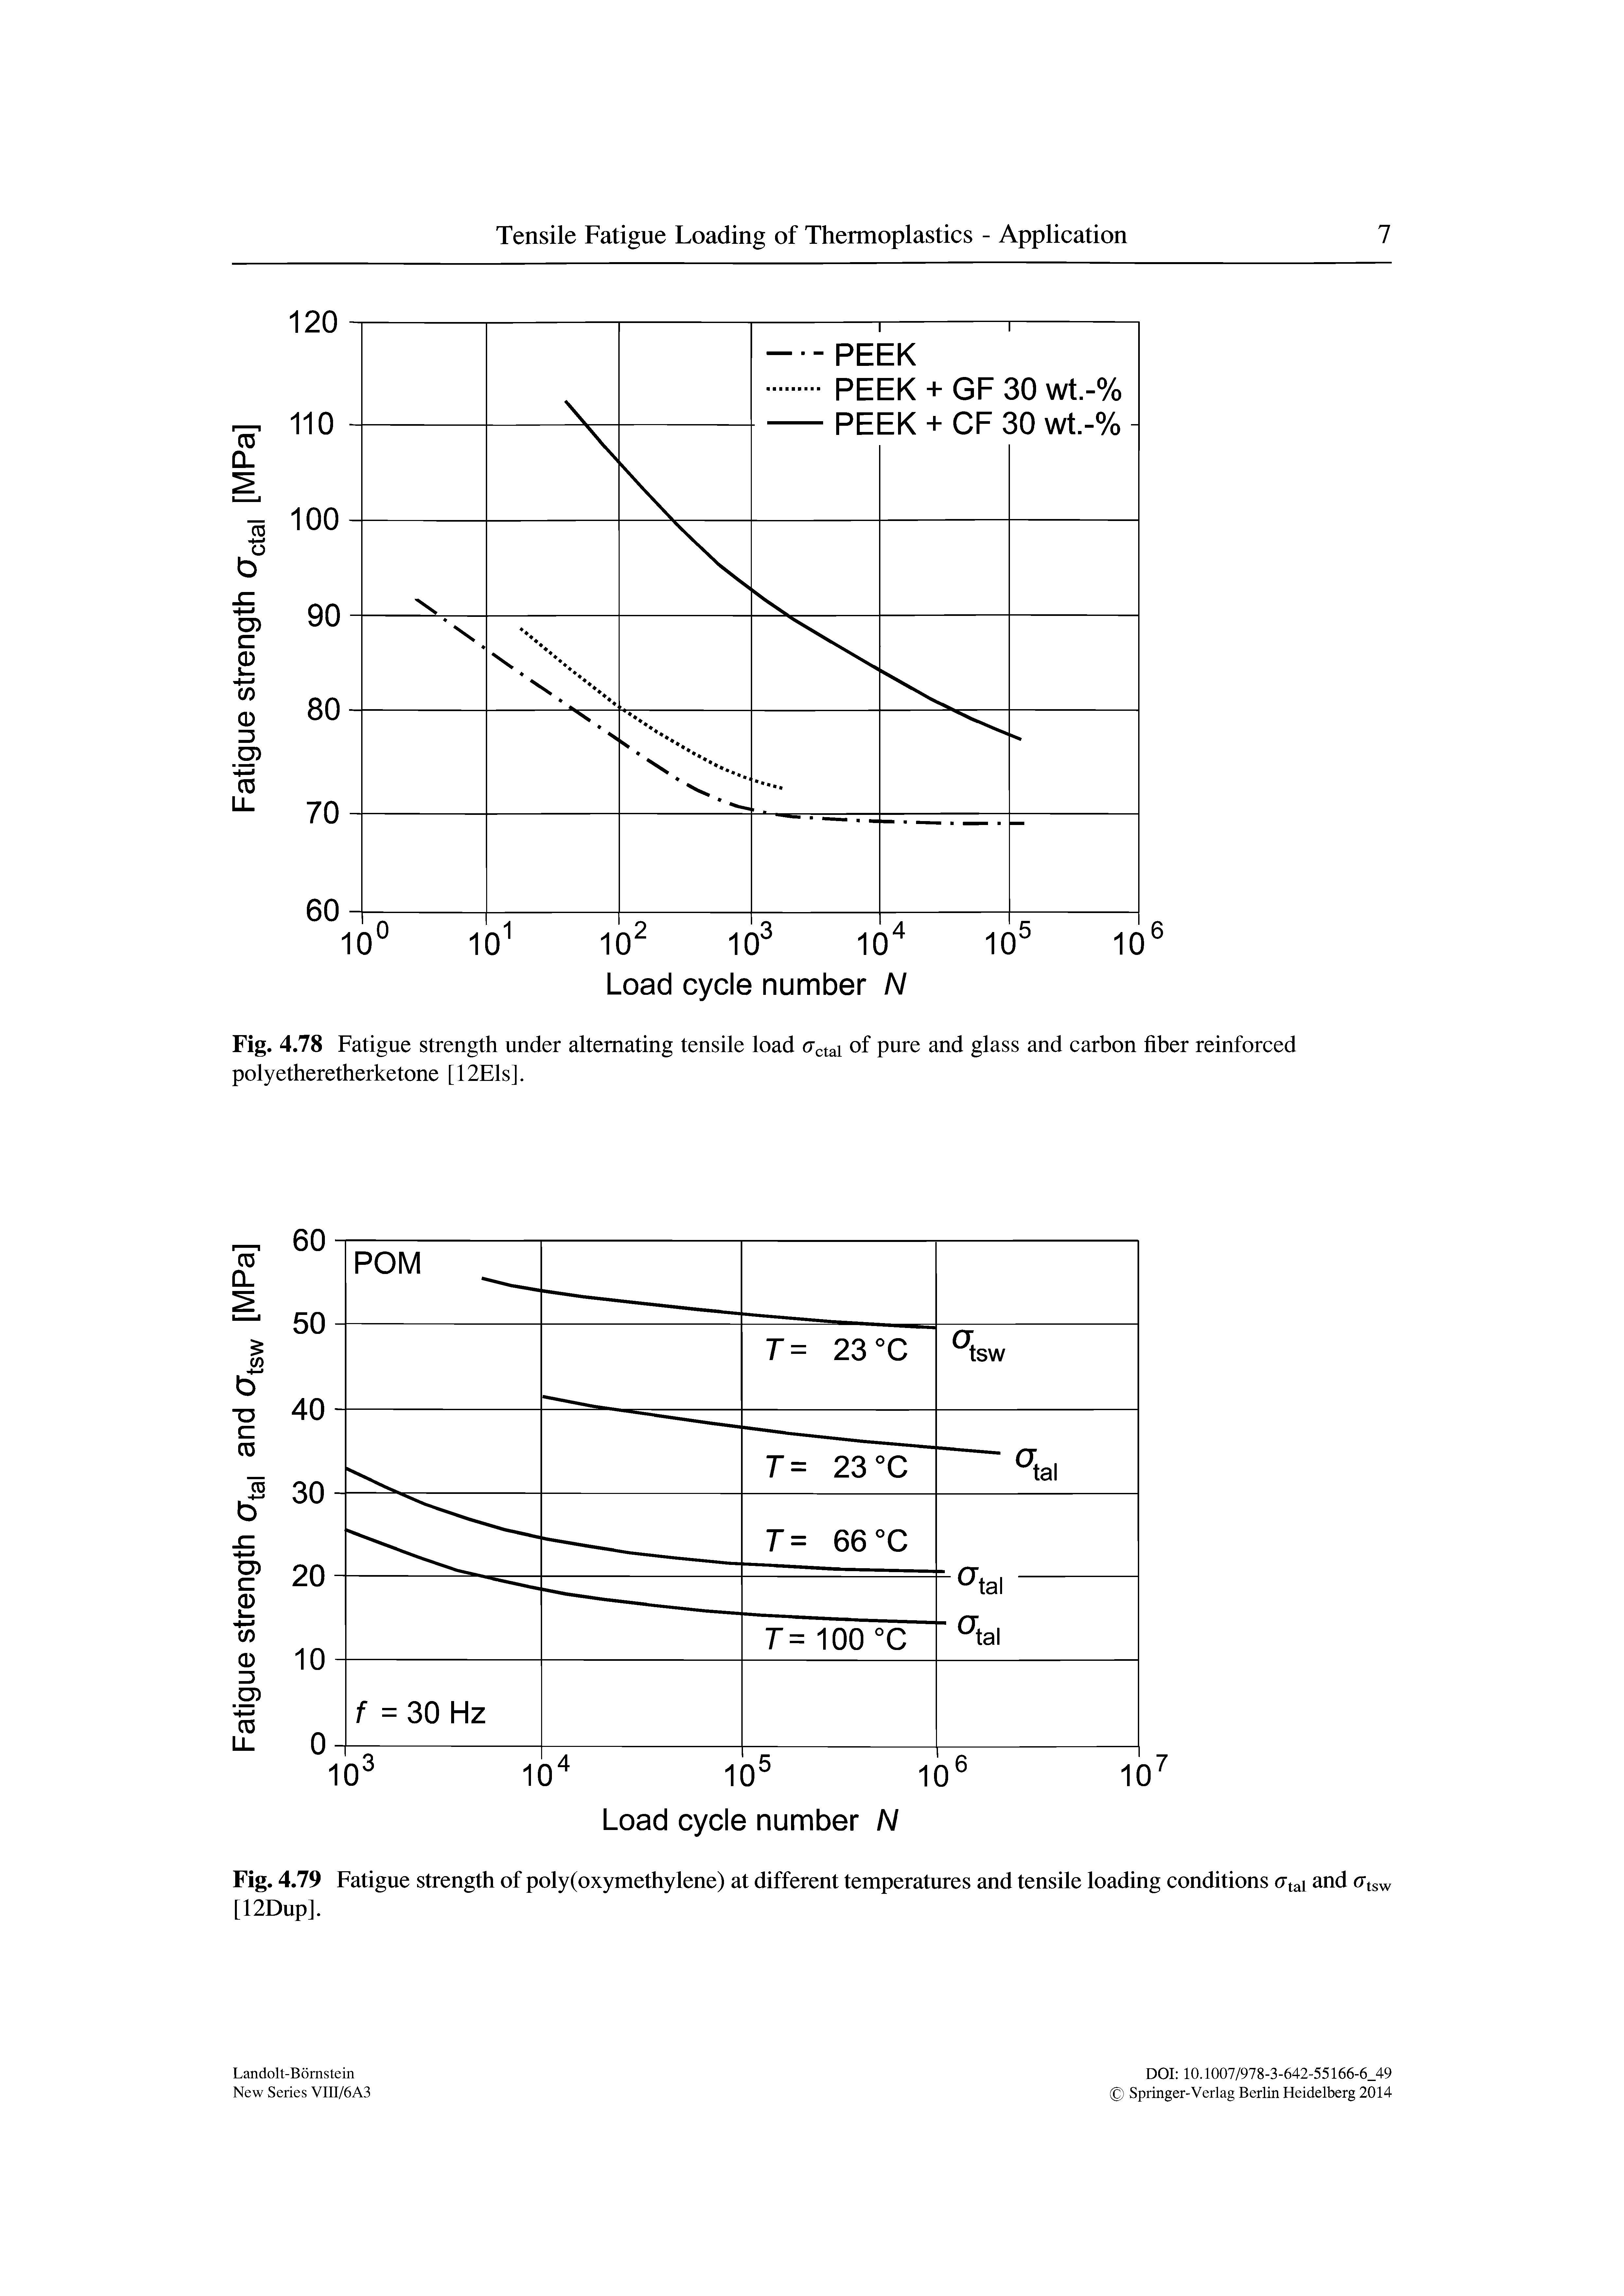 Fig. 4.78 Fatigue strength under alternating tensile load (Tctai of pure and glass and carbon fiber reinforced polyetheretherketone [12Els].